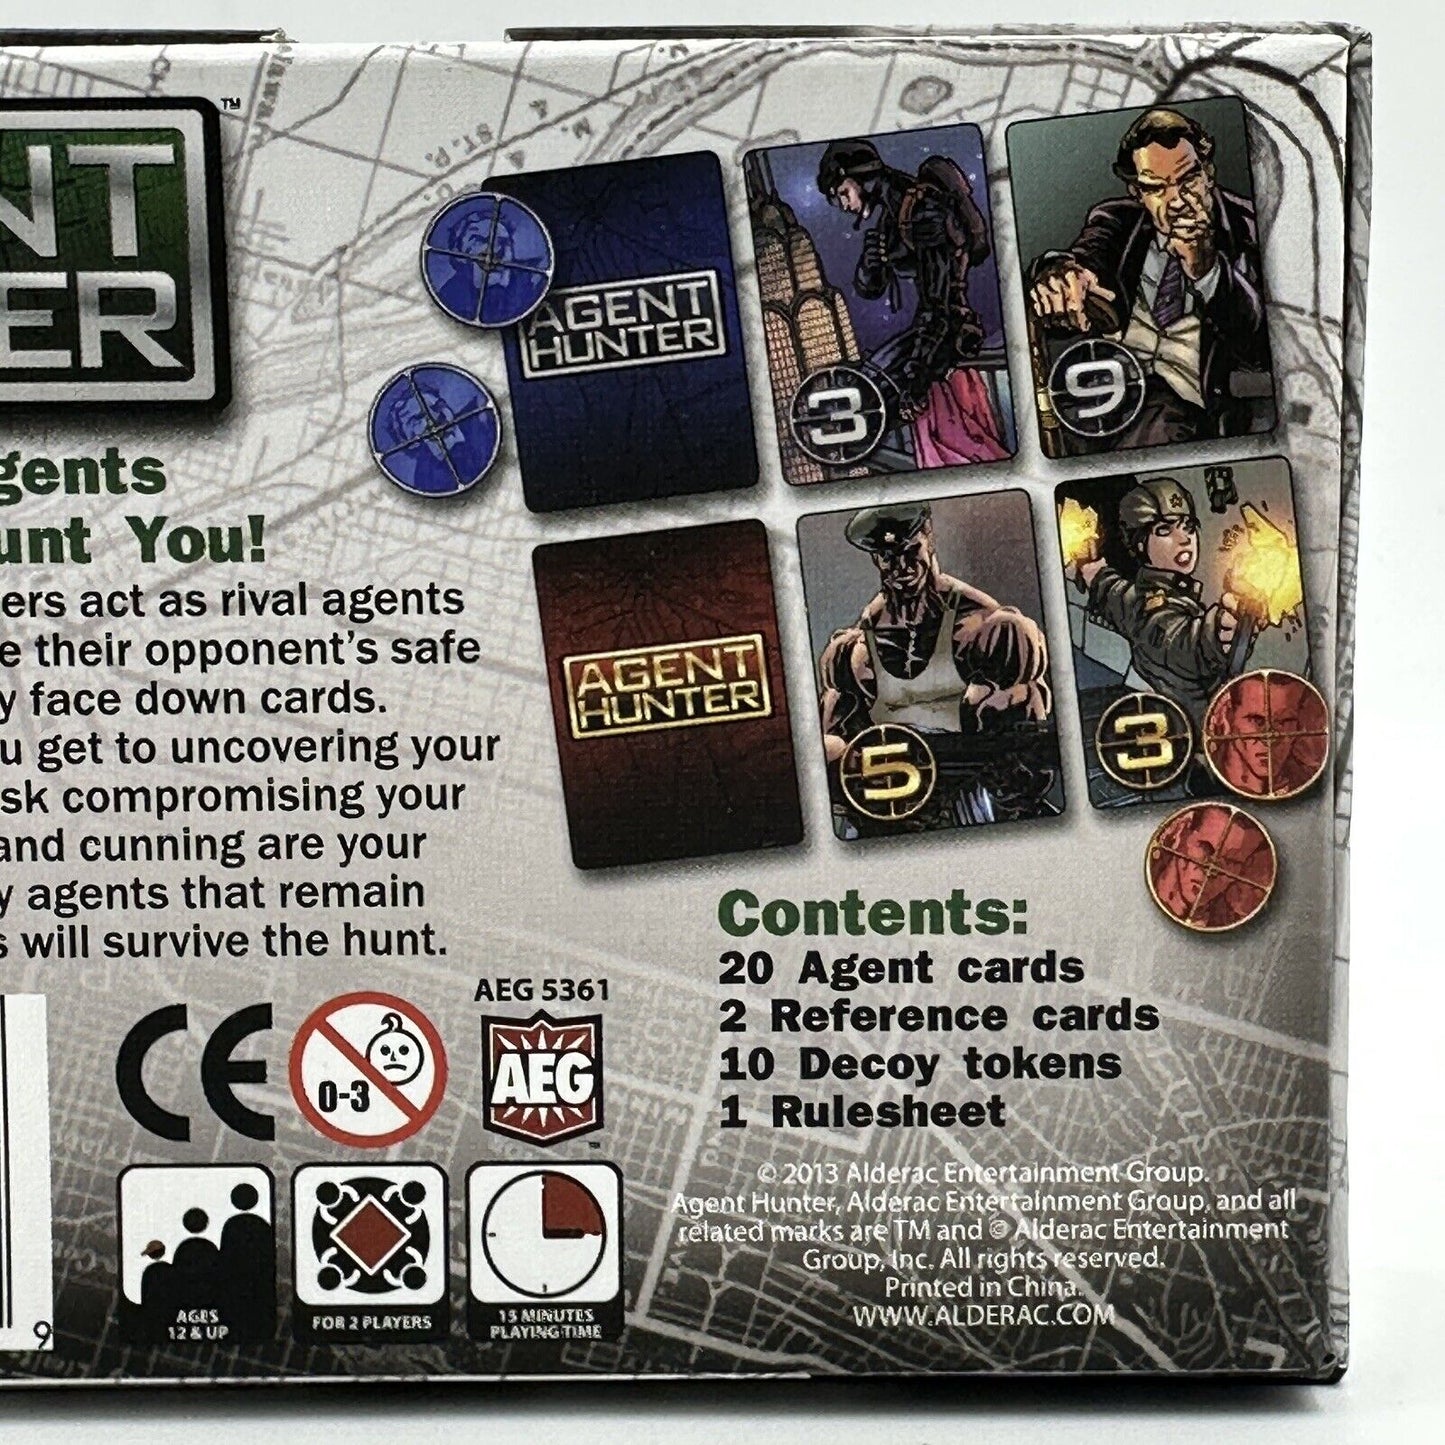 AEG Mike Elliott's Agent Hunter Game of Espionage for 2 Players Cards Fun